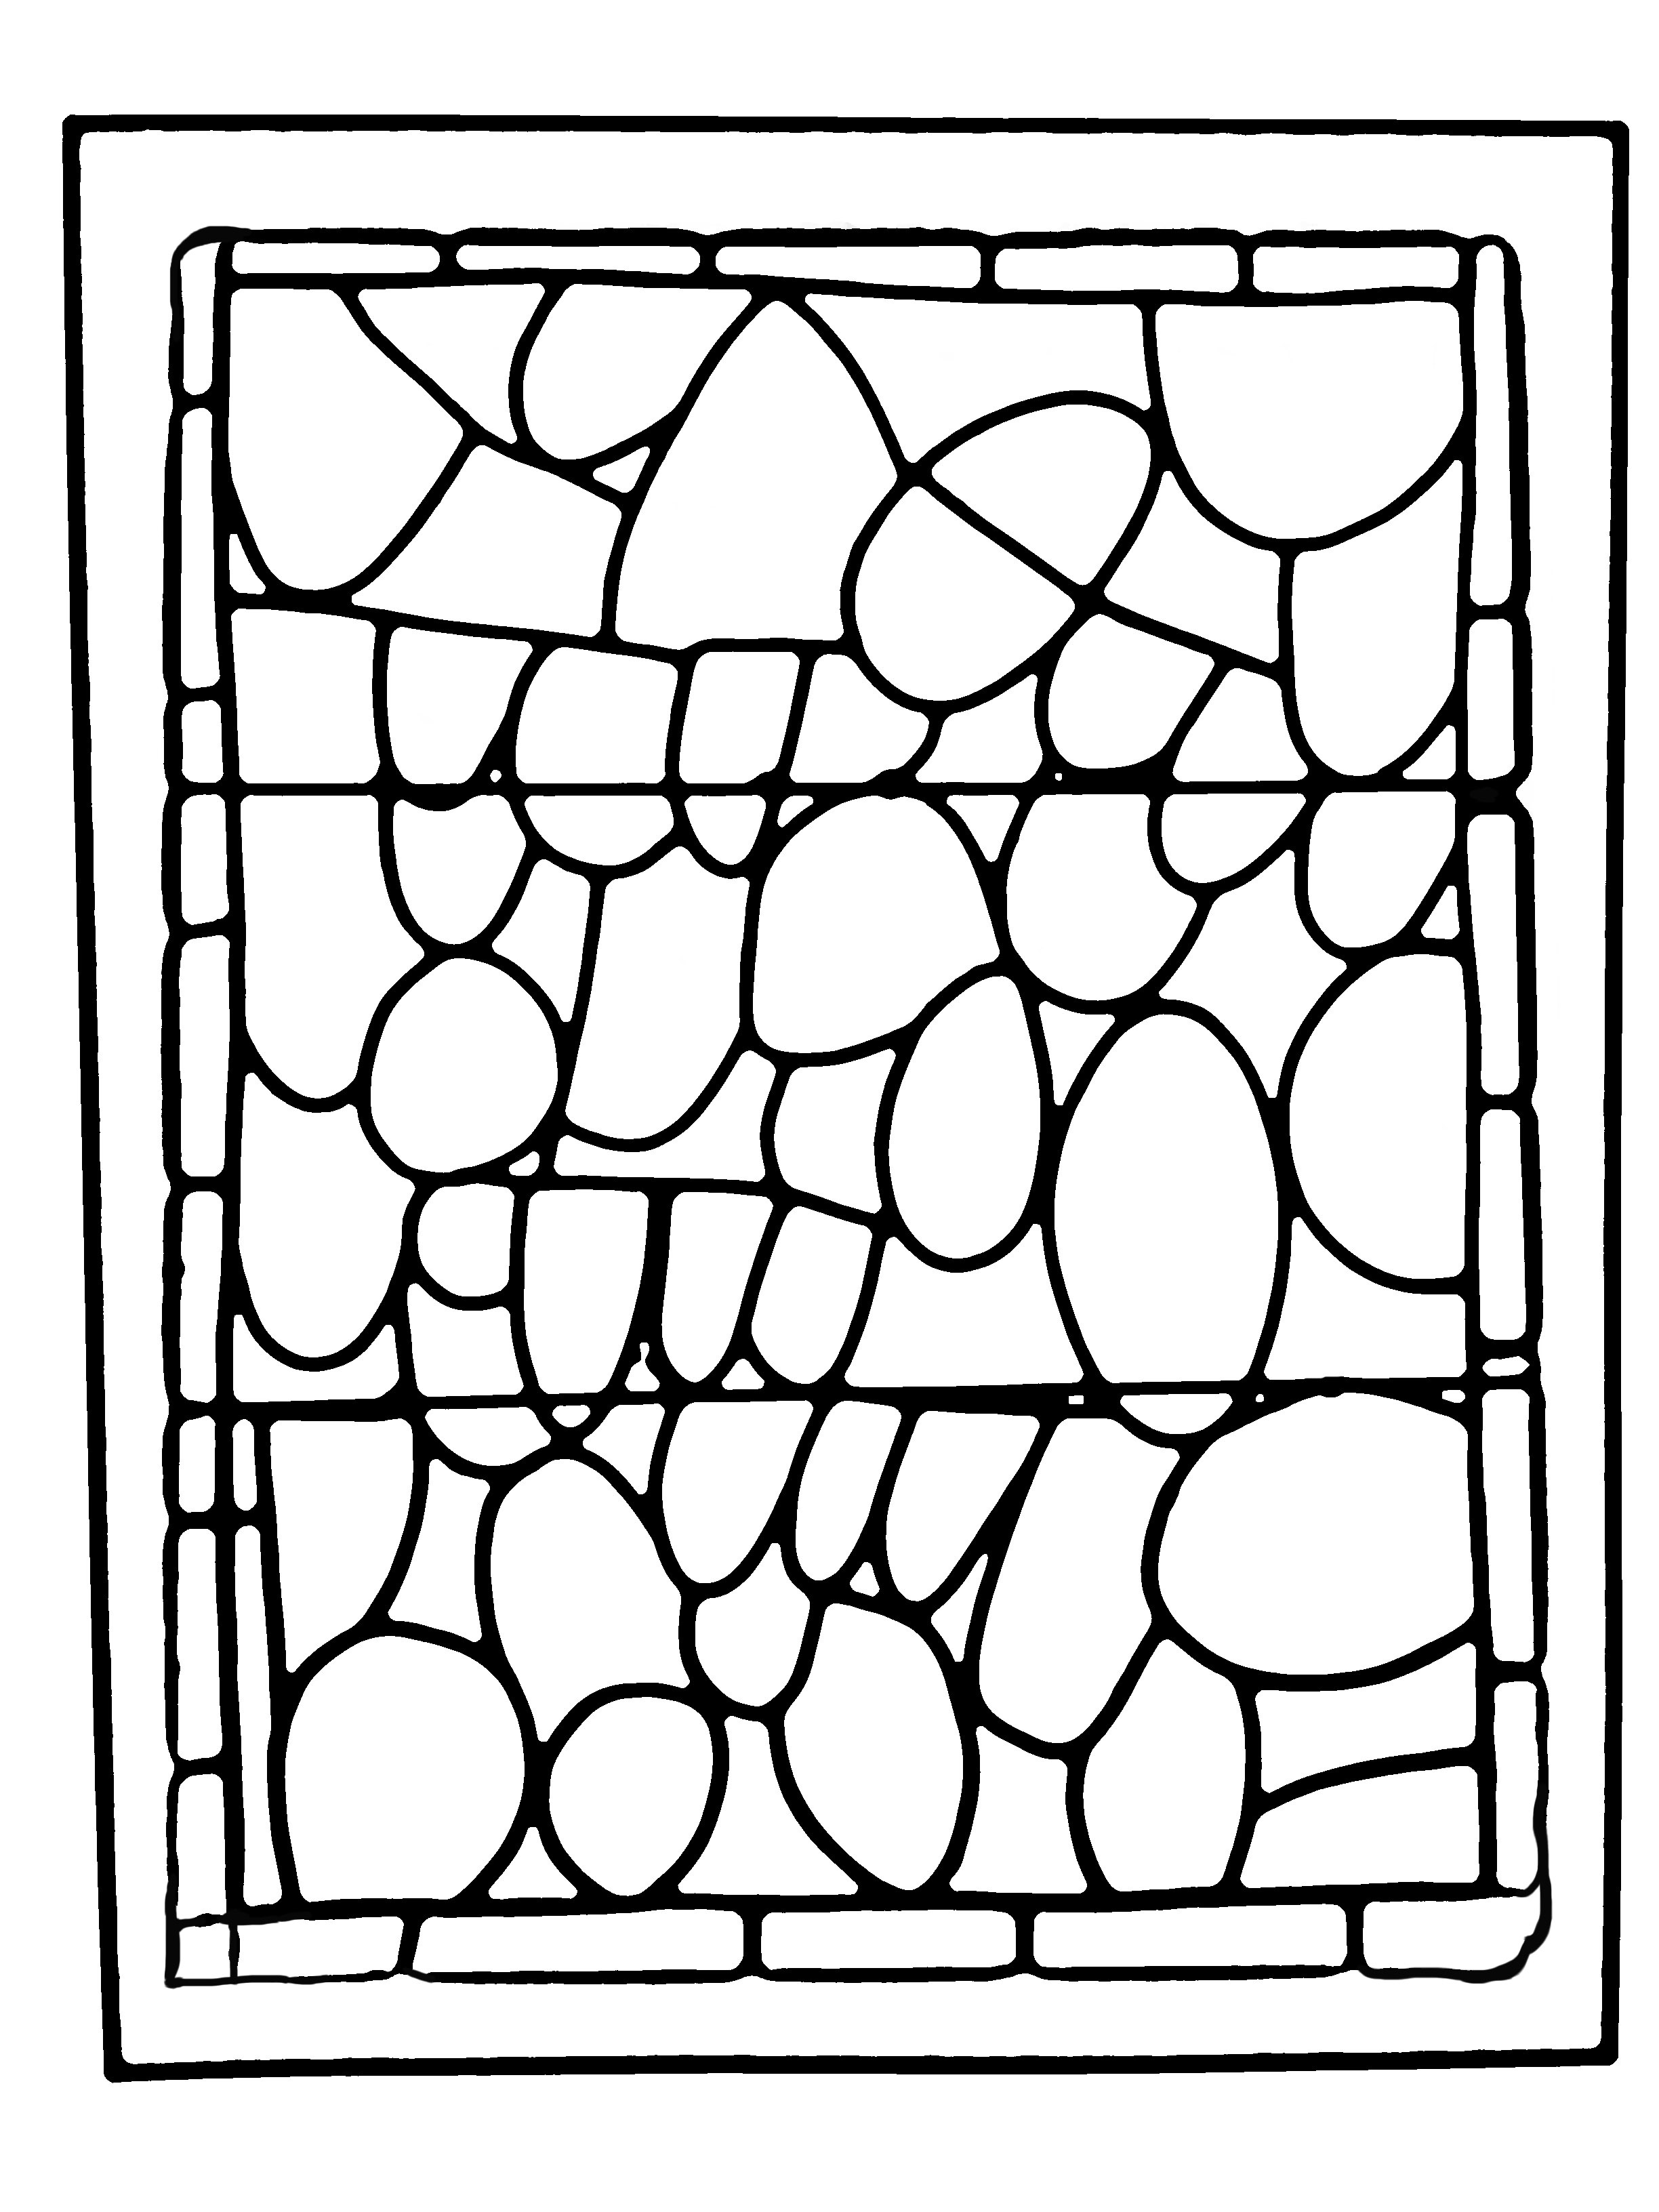 Coloring page made from a modern Stained glass : Chapel of Prieuré de Bethleem, Nîmes, France